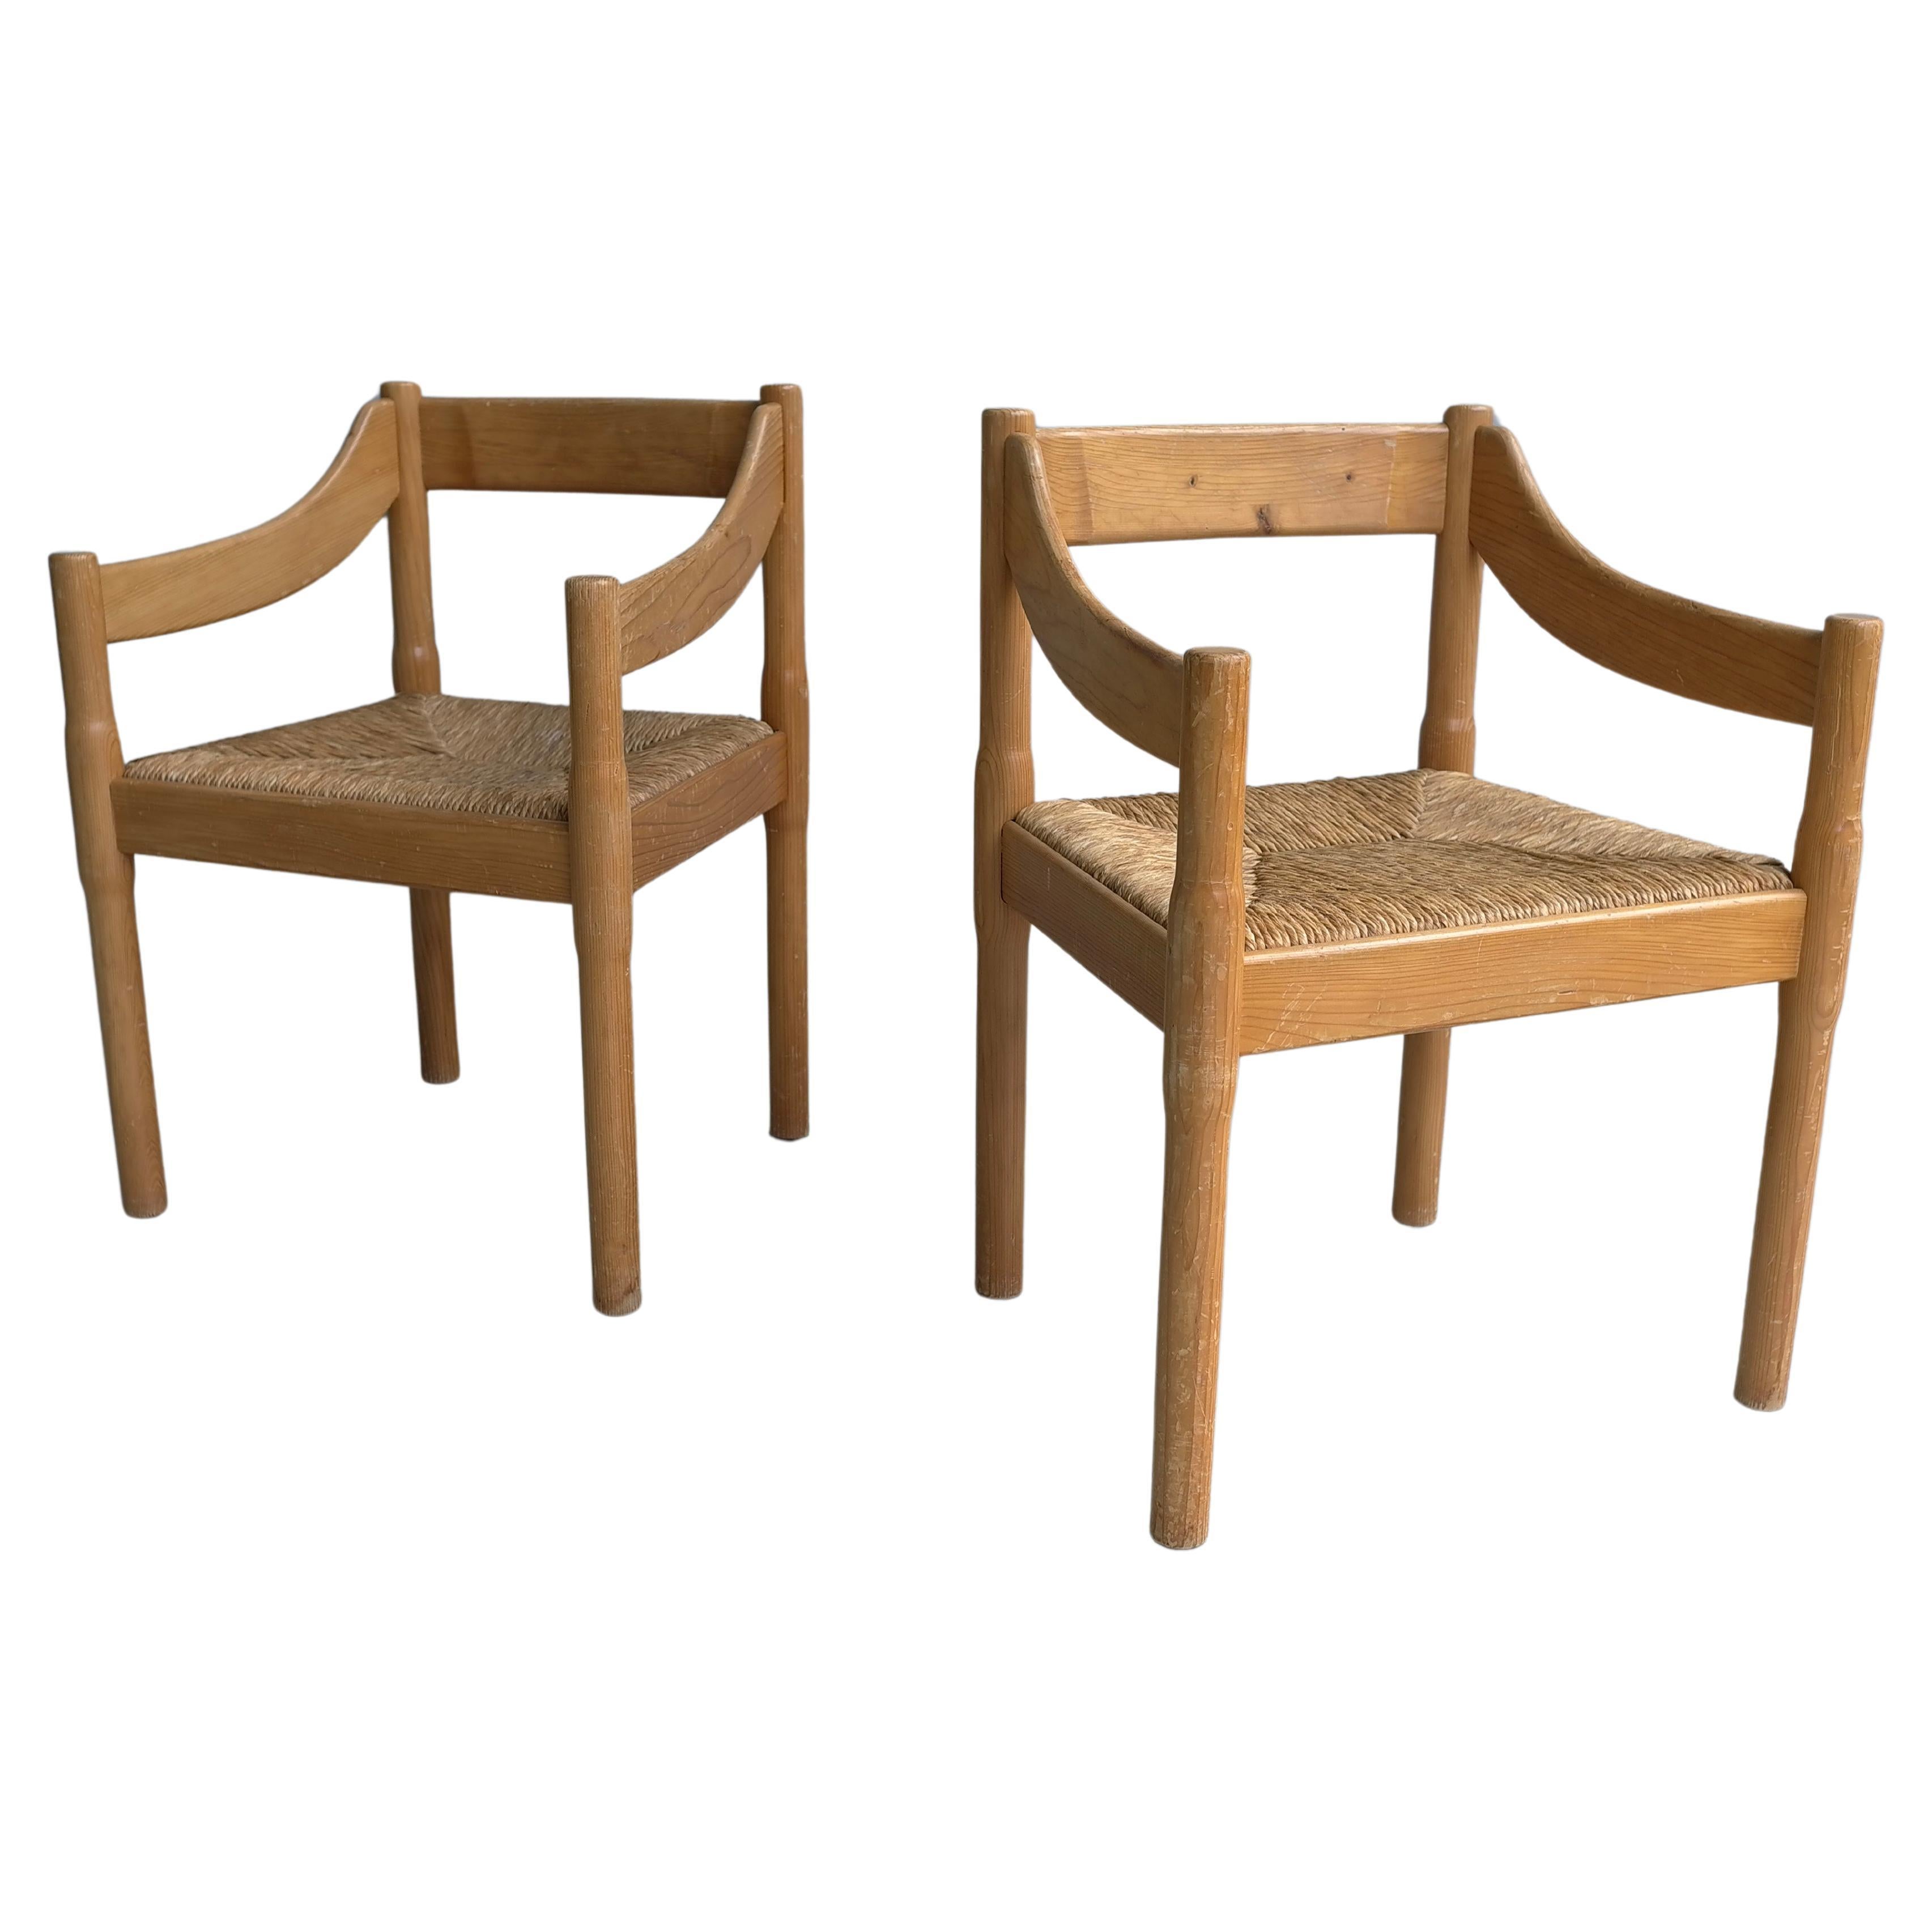 Pair of Pine "Carimate" Chairs by Vico Magistretti voor Cassina, Italy 1960's